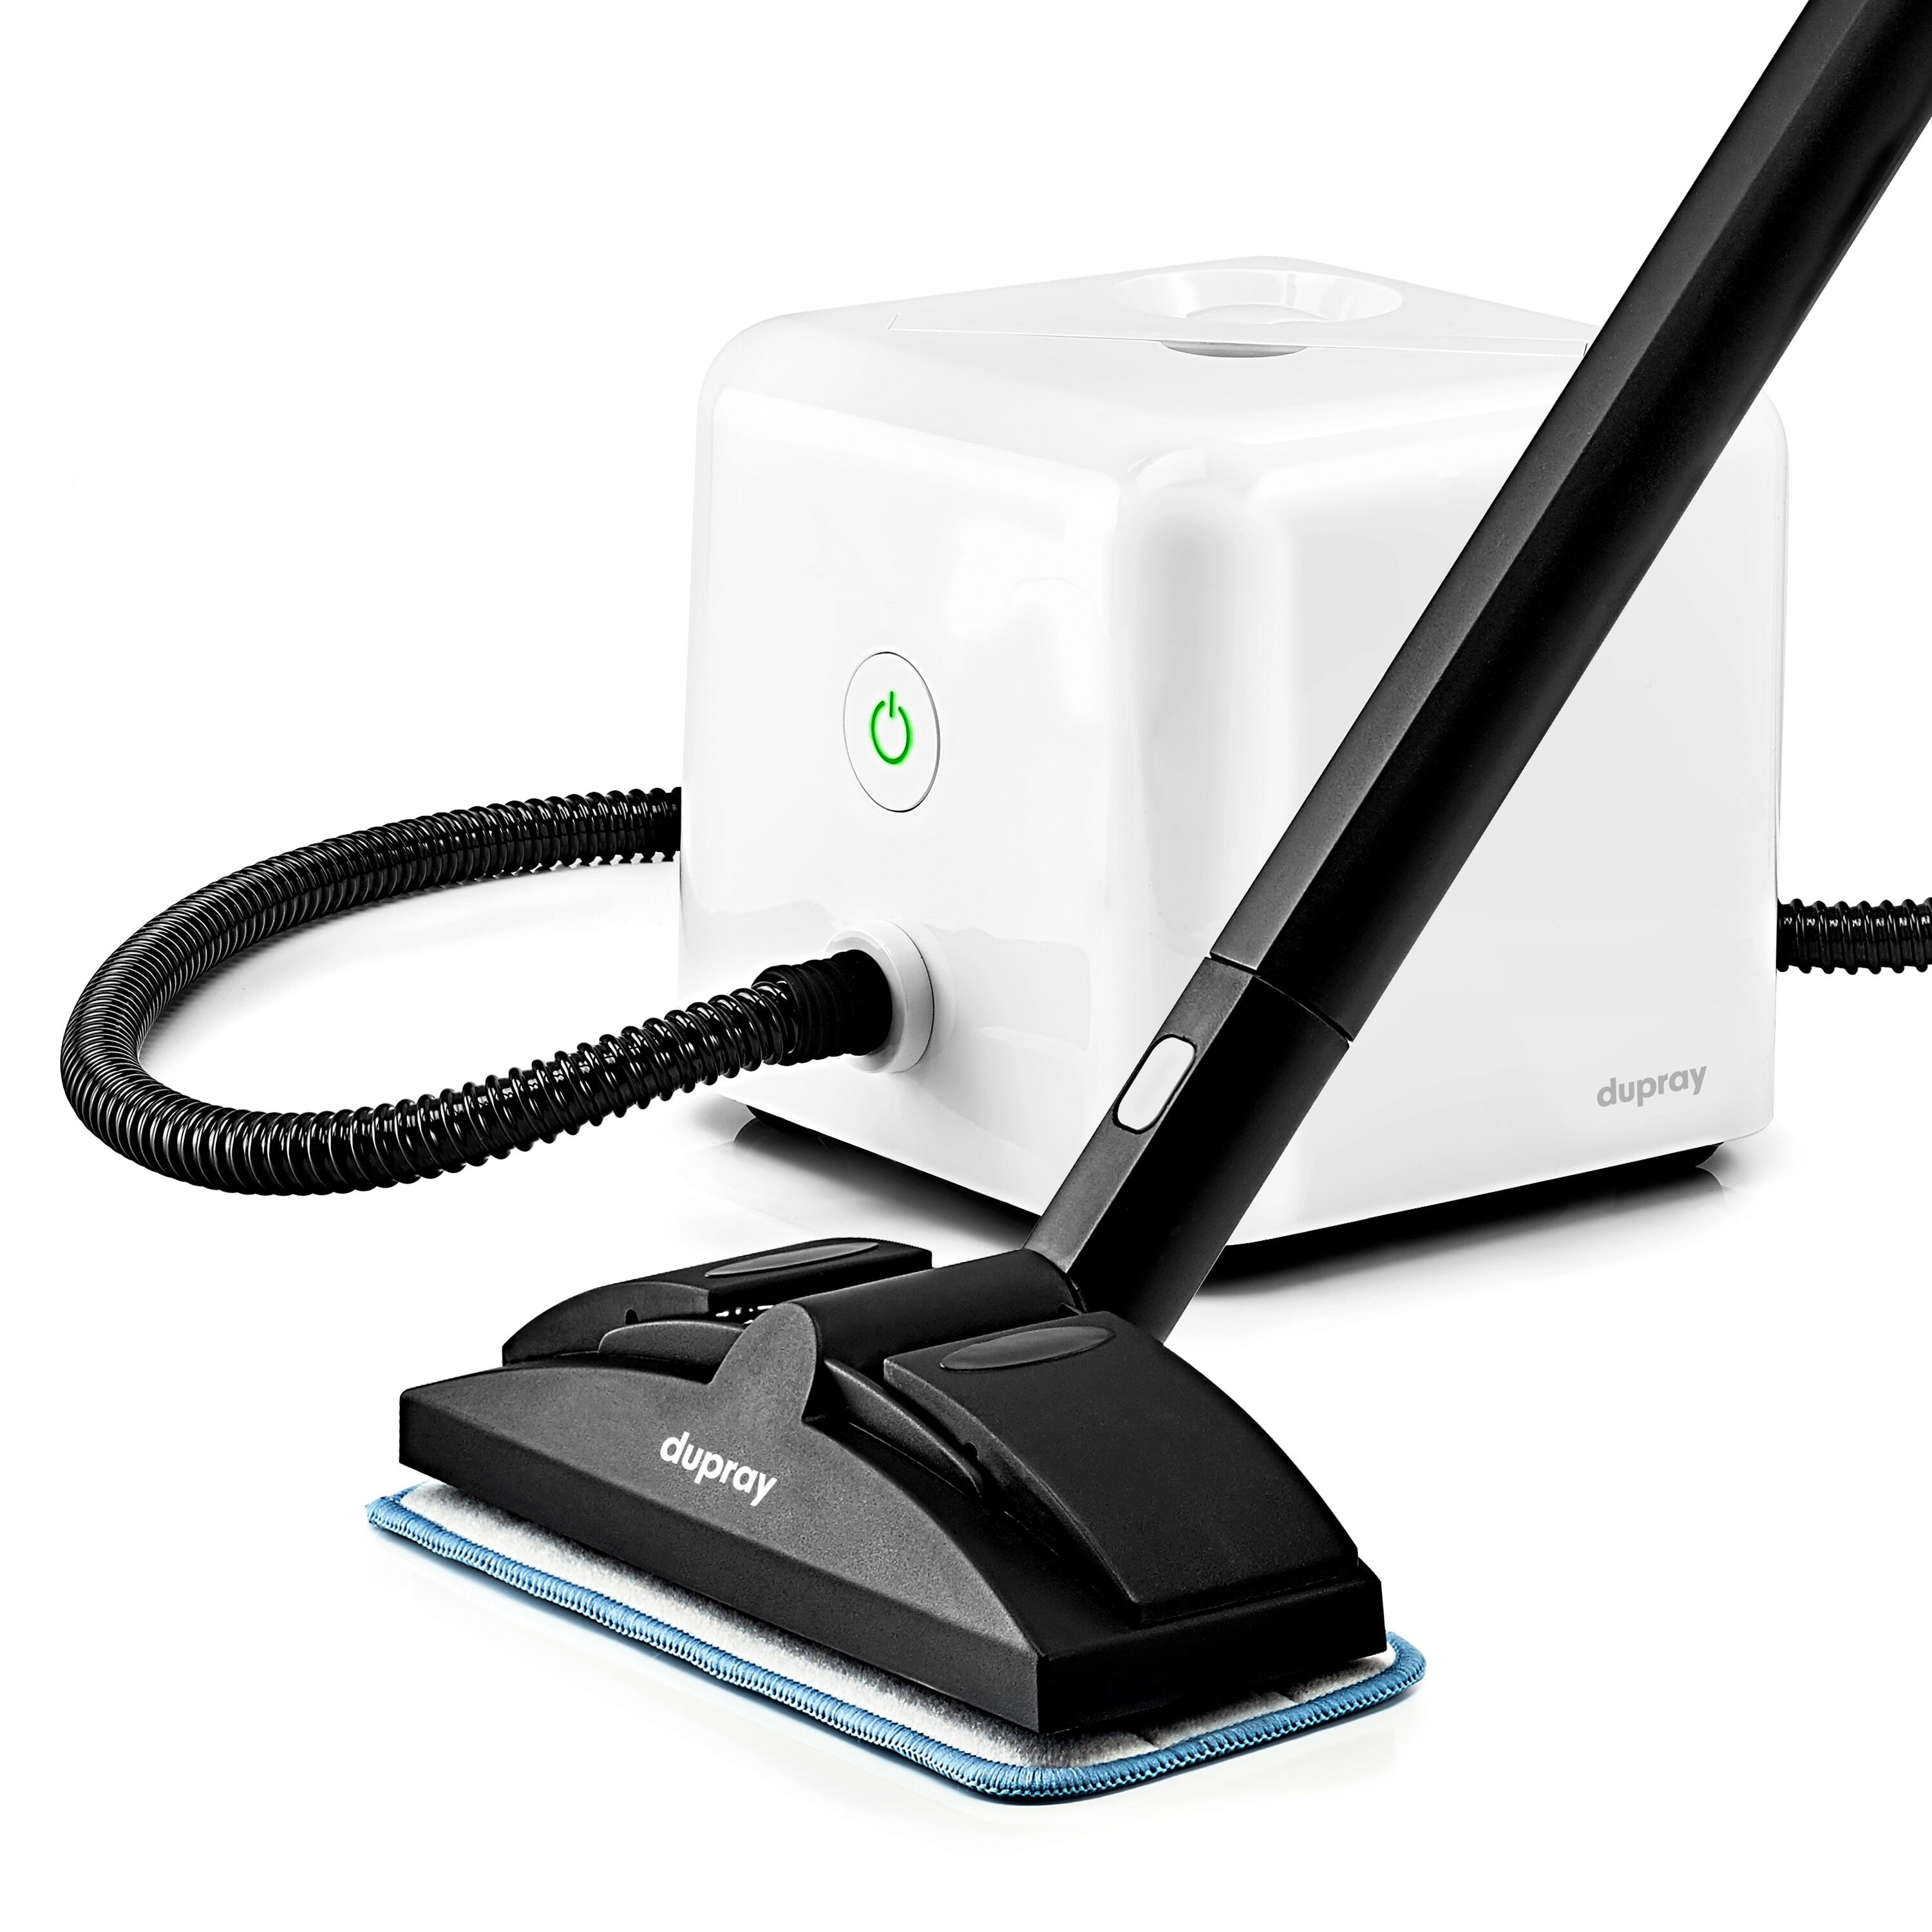  Kärcher SC3 Steam Cleaner with Attachments, Multi Purpose  Power Steamer – Chemical-Free, 40 Sec Heat-Up, Continuous Steam - for  Grout, Tile, Hard Floors, Appliances & More - White